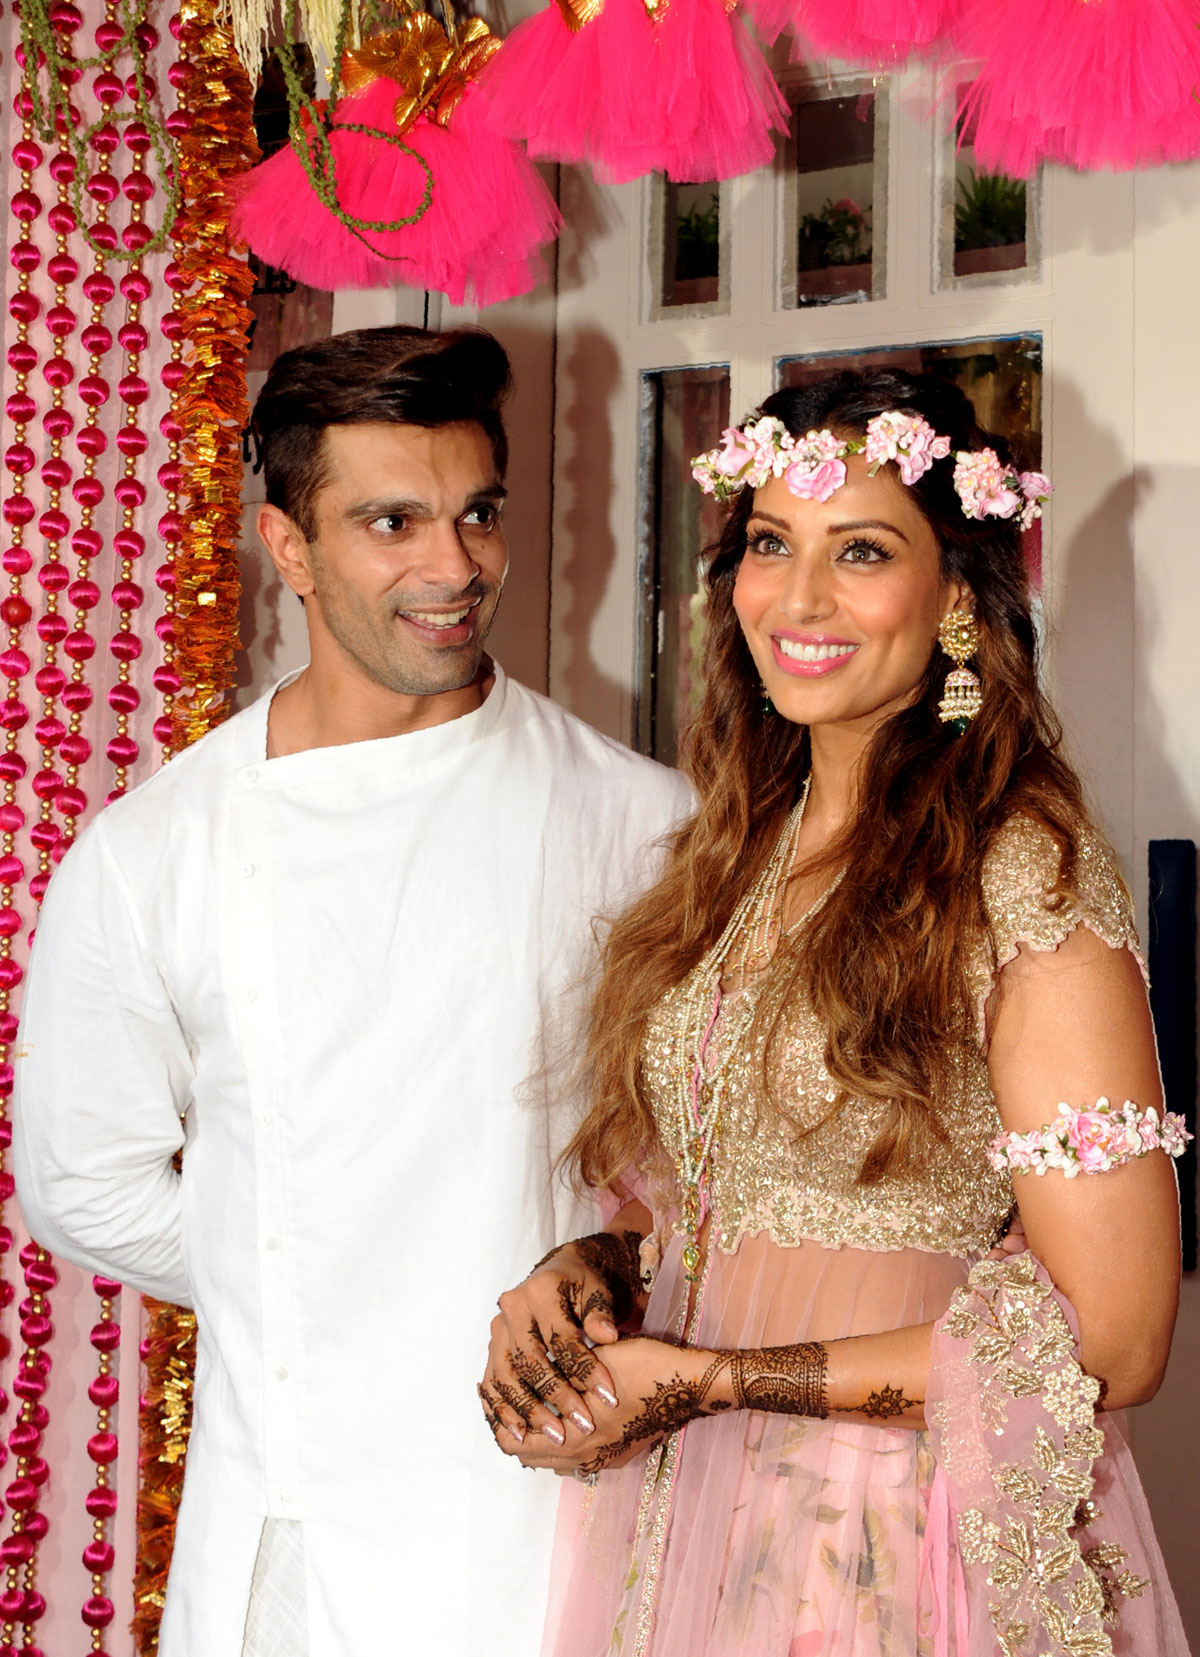 Karan Singh Grover (l) and Bipasha Basu pose for a photograph during their mehendi ceremony in Mumbai, April 29. (AFP | Getty Images) 